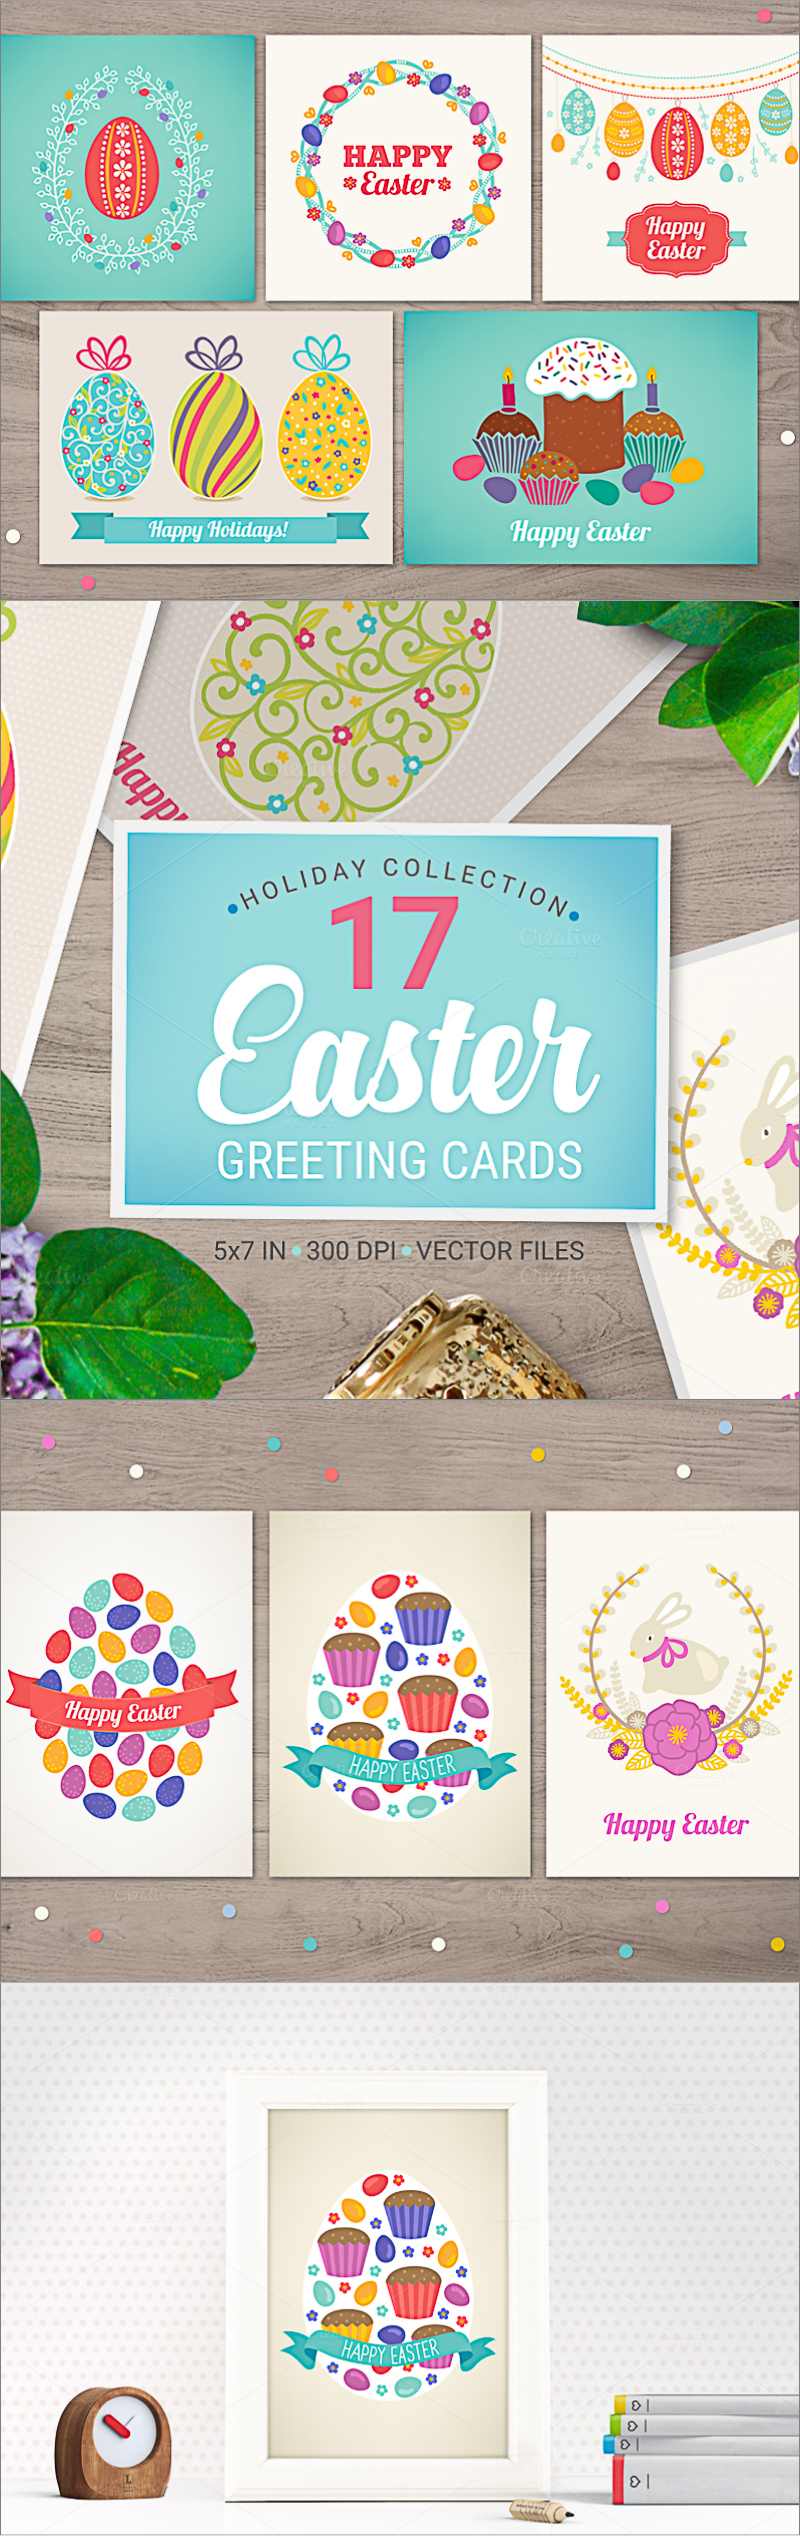 17 Easter cards and greetings collection